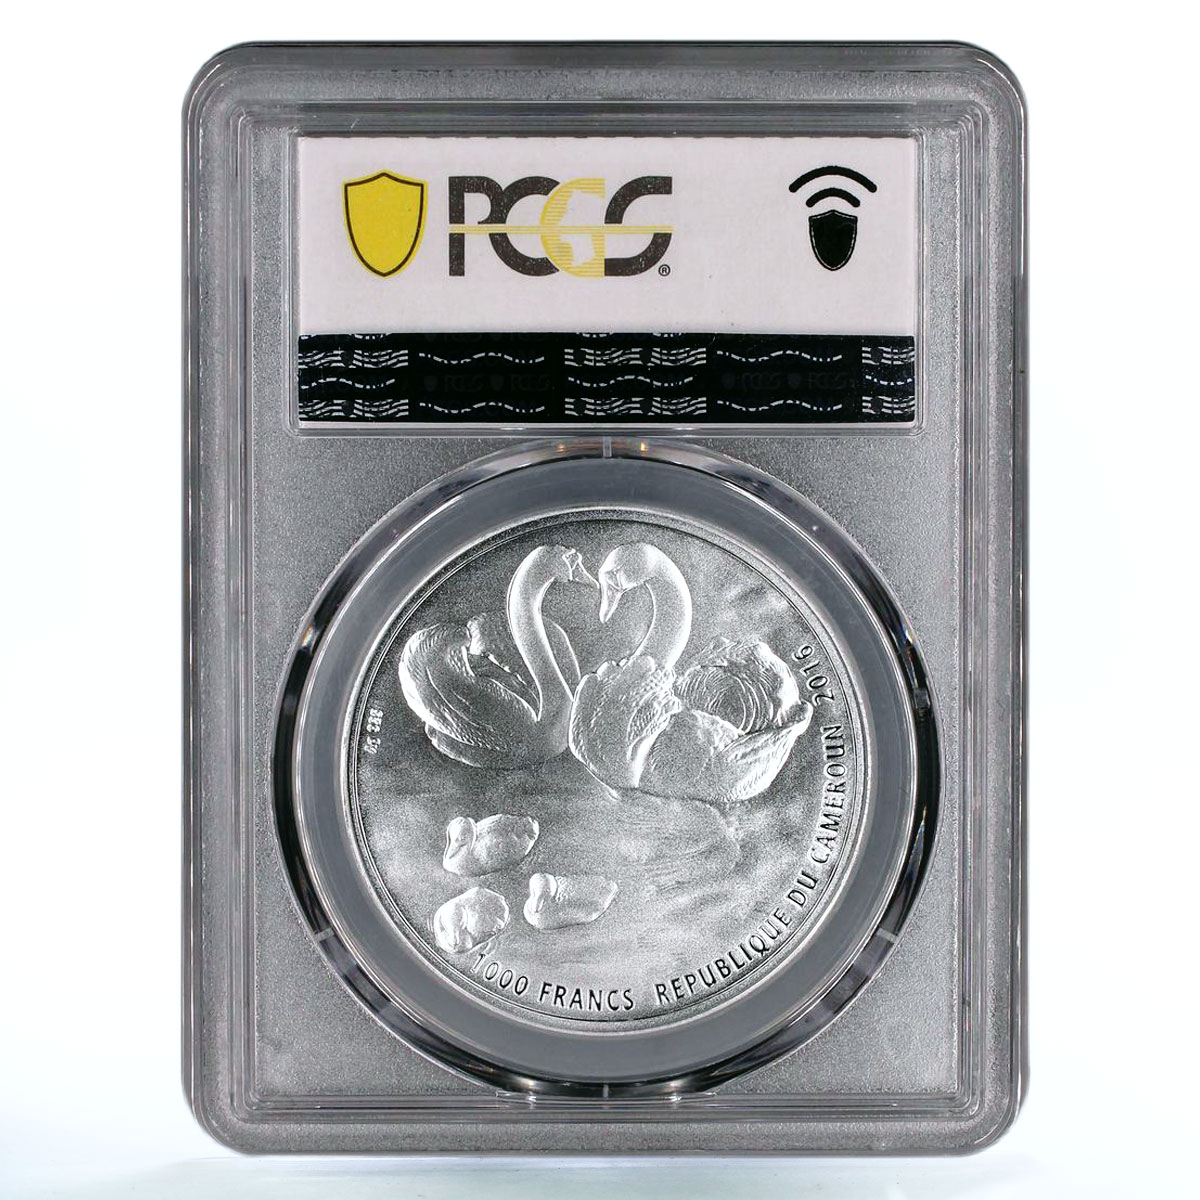 Cameroon 1000 francs True Love Swans Birds MS69 PCGS colored silver coin 2016